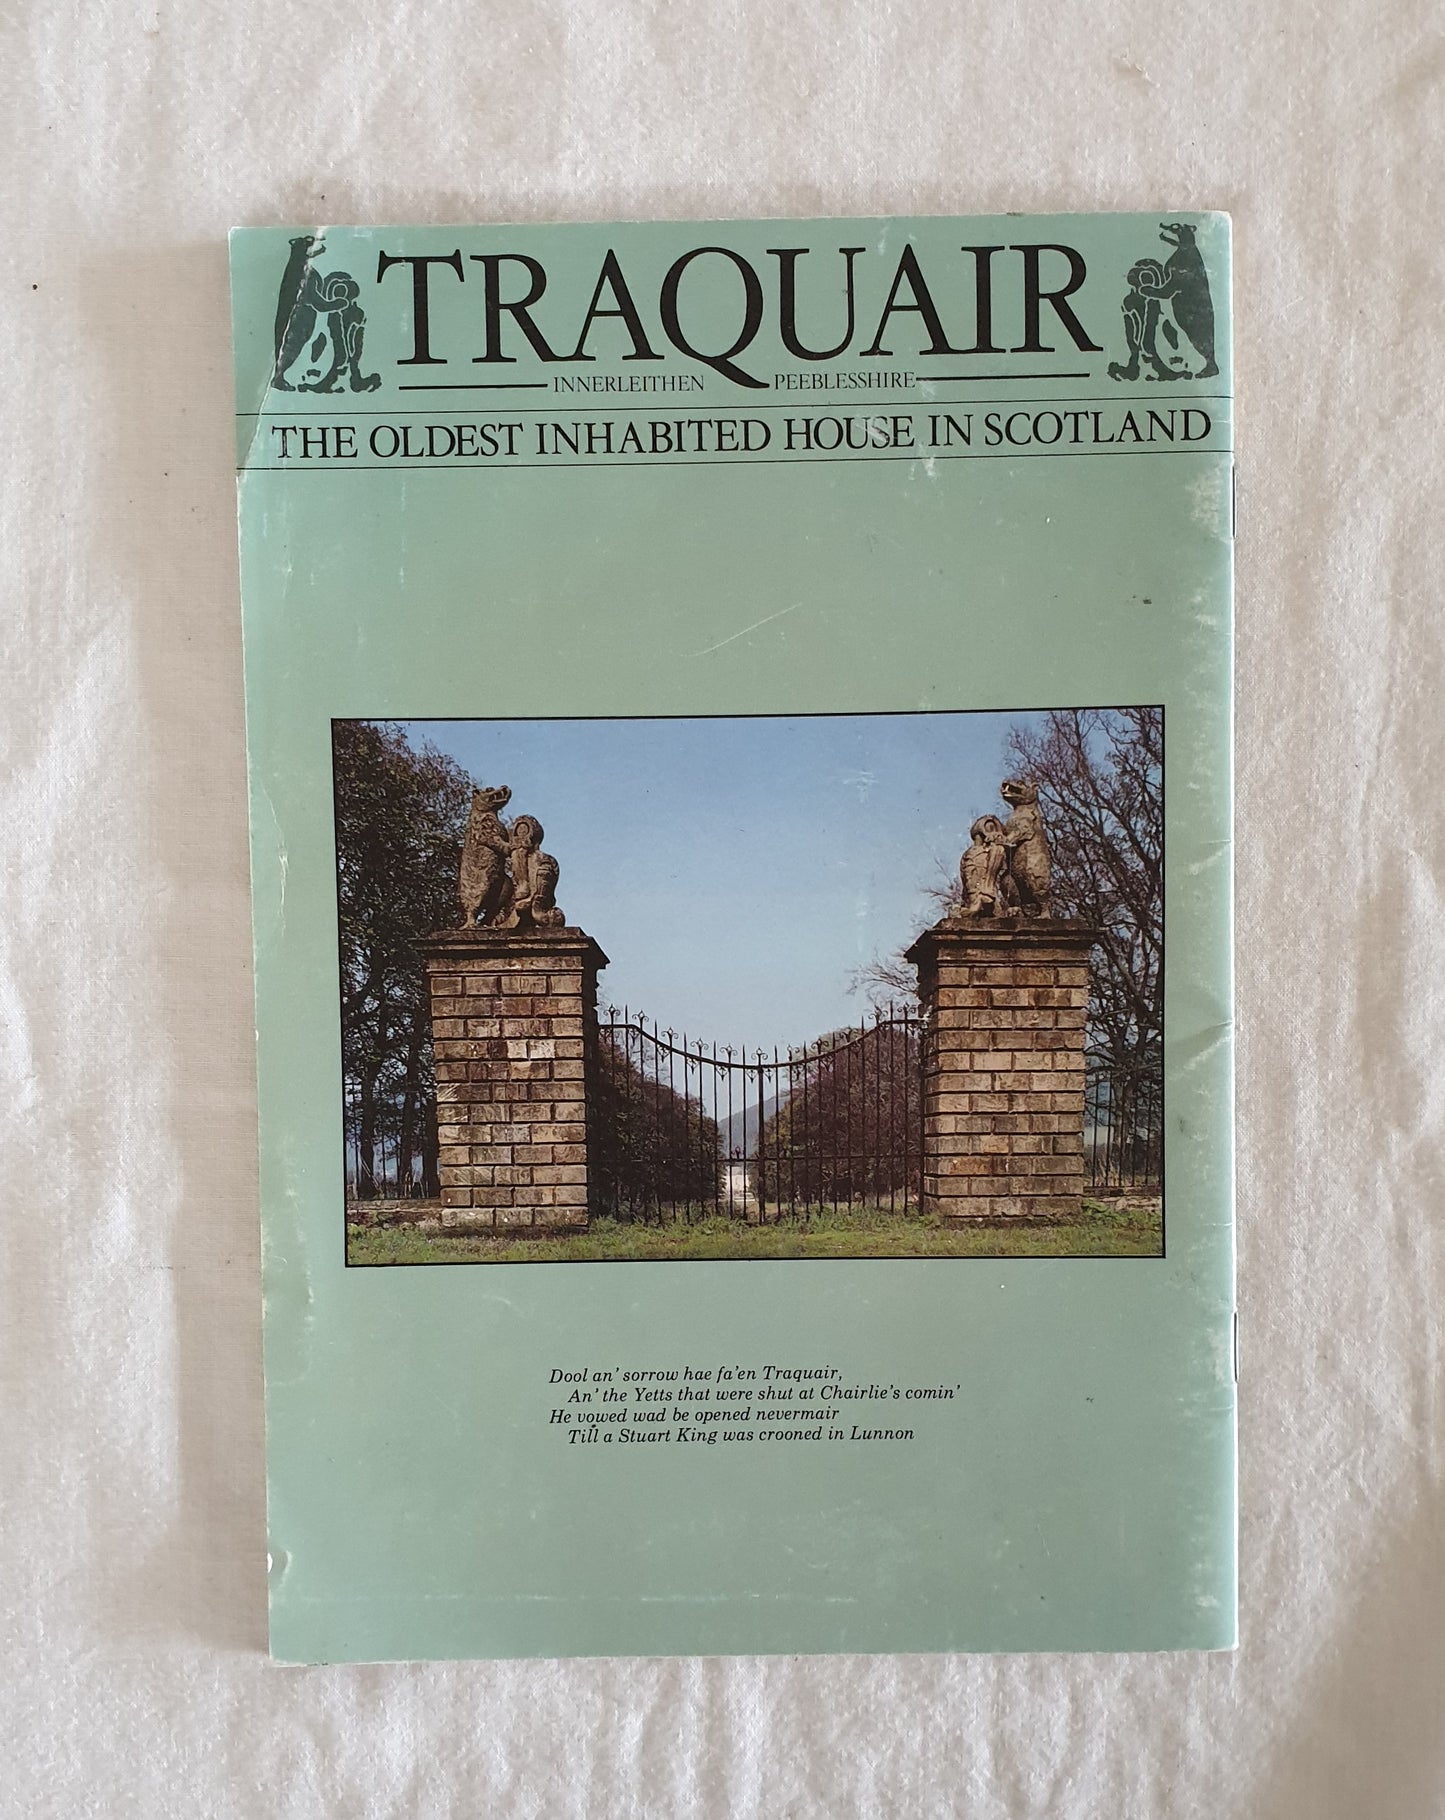 Traquair House: The Oldest Inhabited House in Scotland